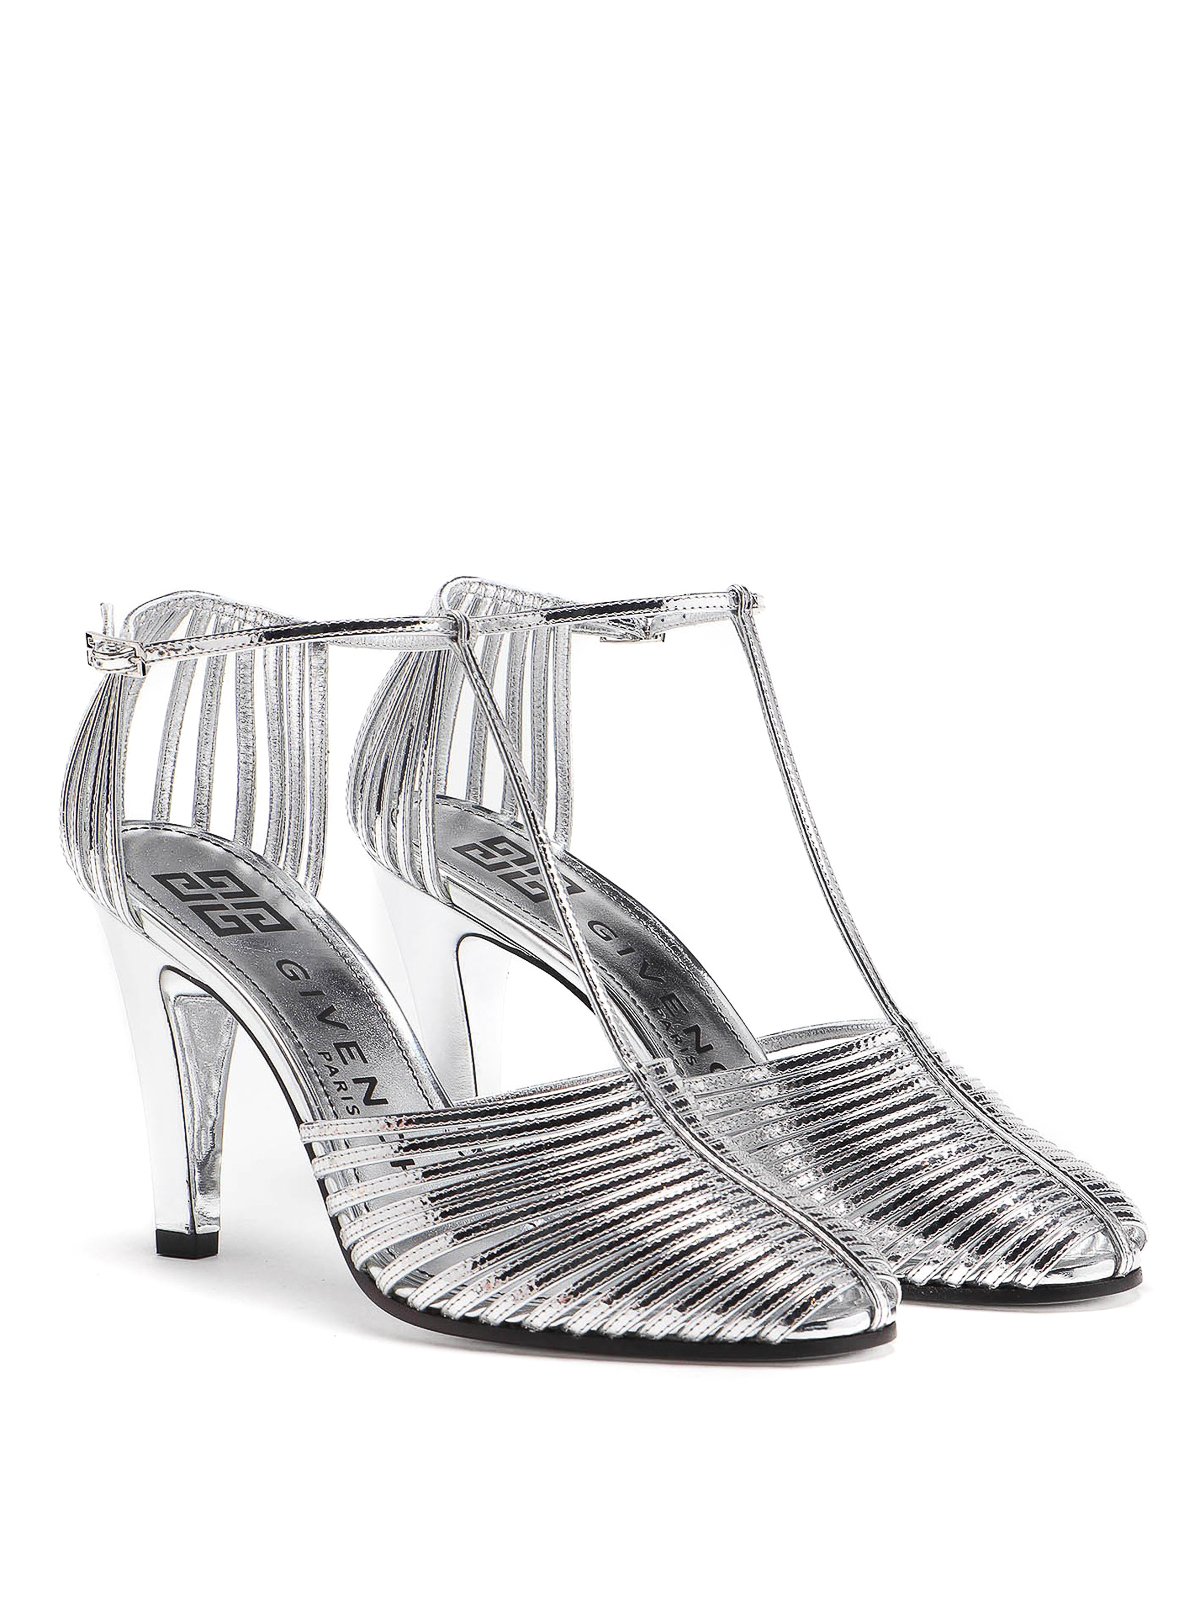 Givenchy - T-strap silver sandals 